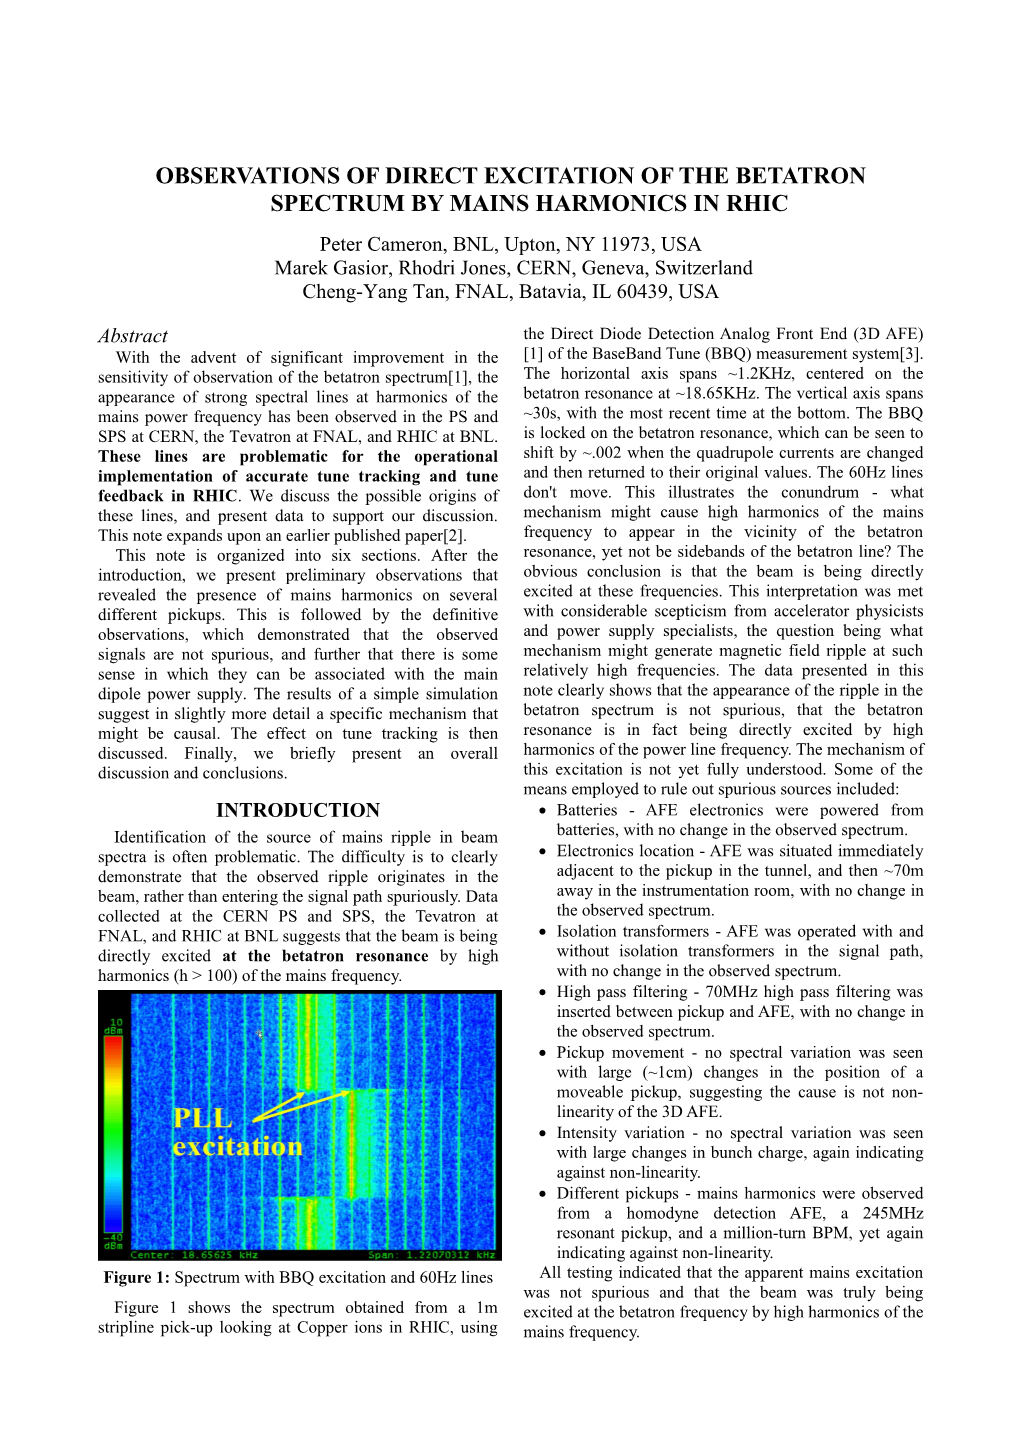 Observations of Direct Excitation of the Betatron Spectrum by Mains Harmonics in RHIC